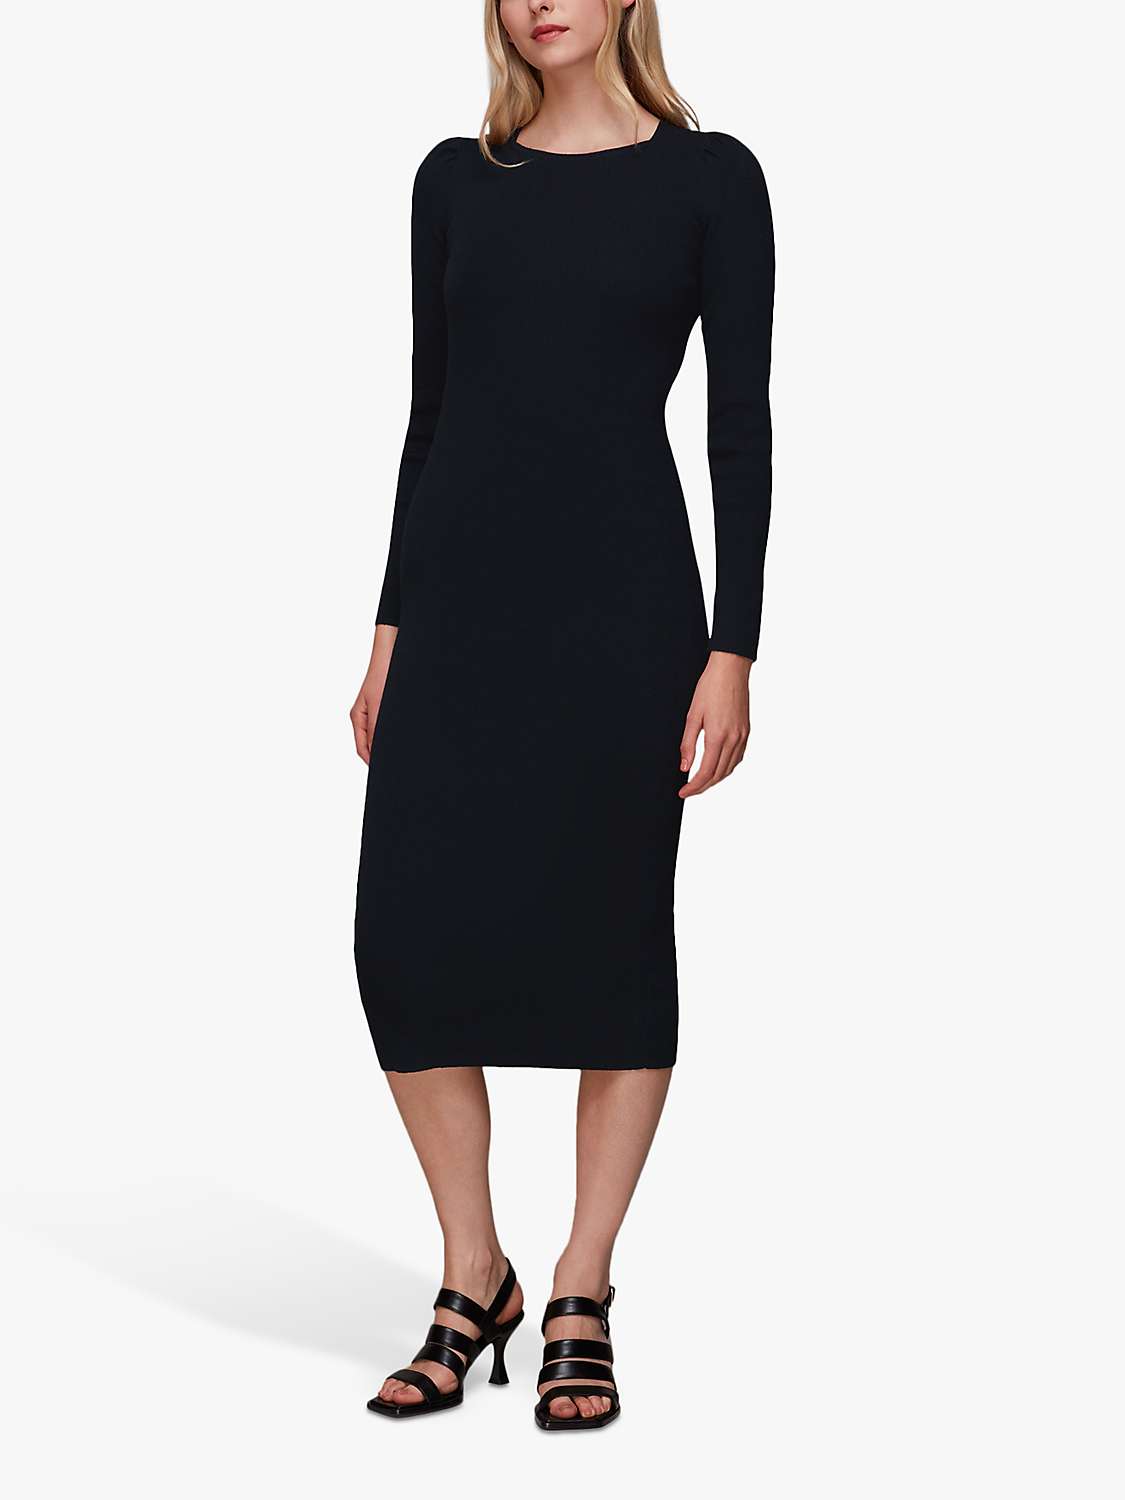 Whistles Cut Out Twist Knitted Dress, Black at John Lewis & Partners